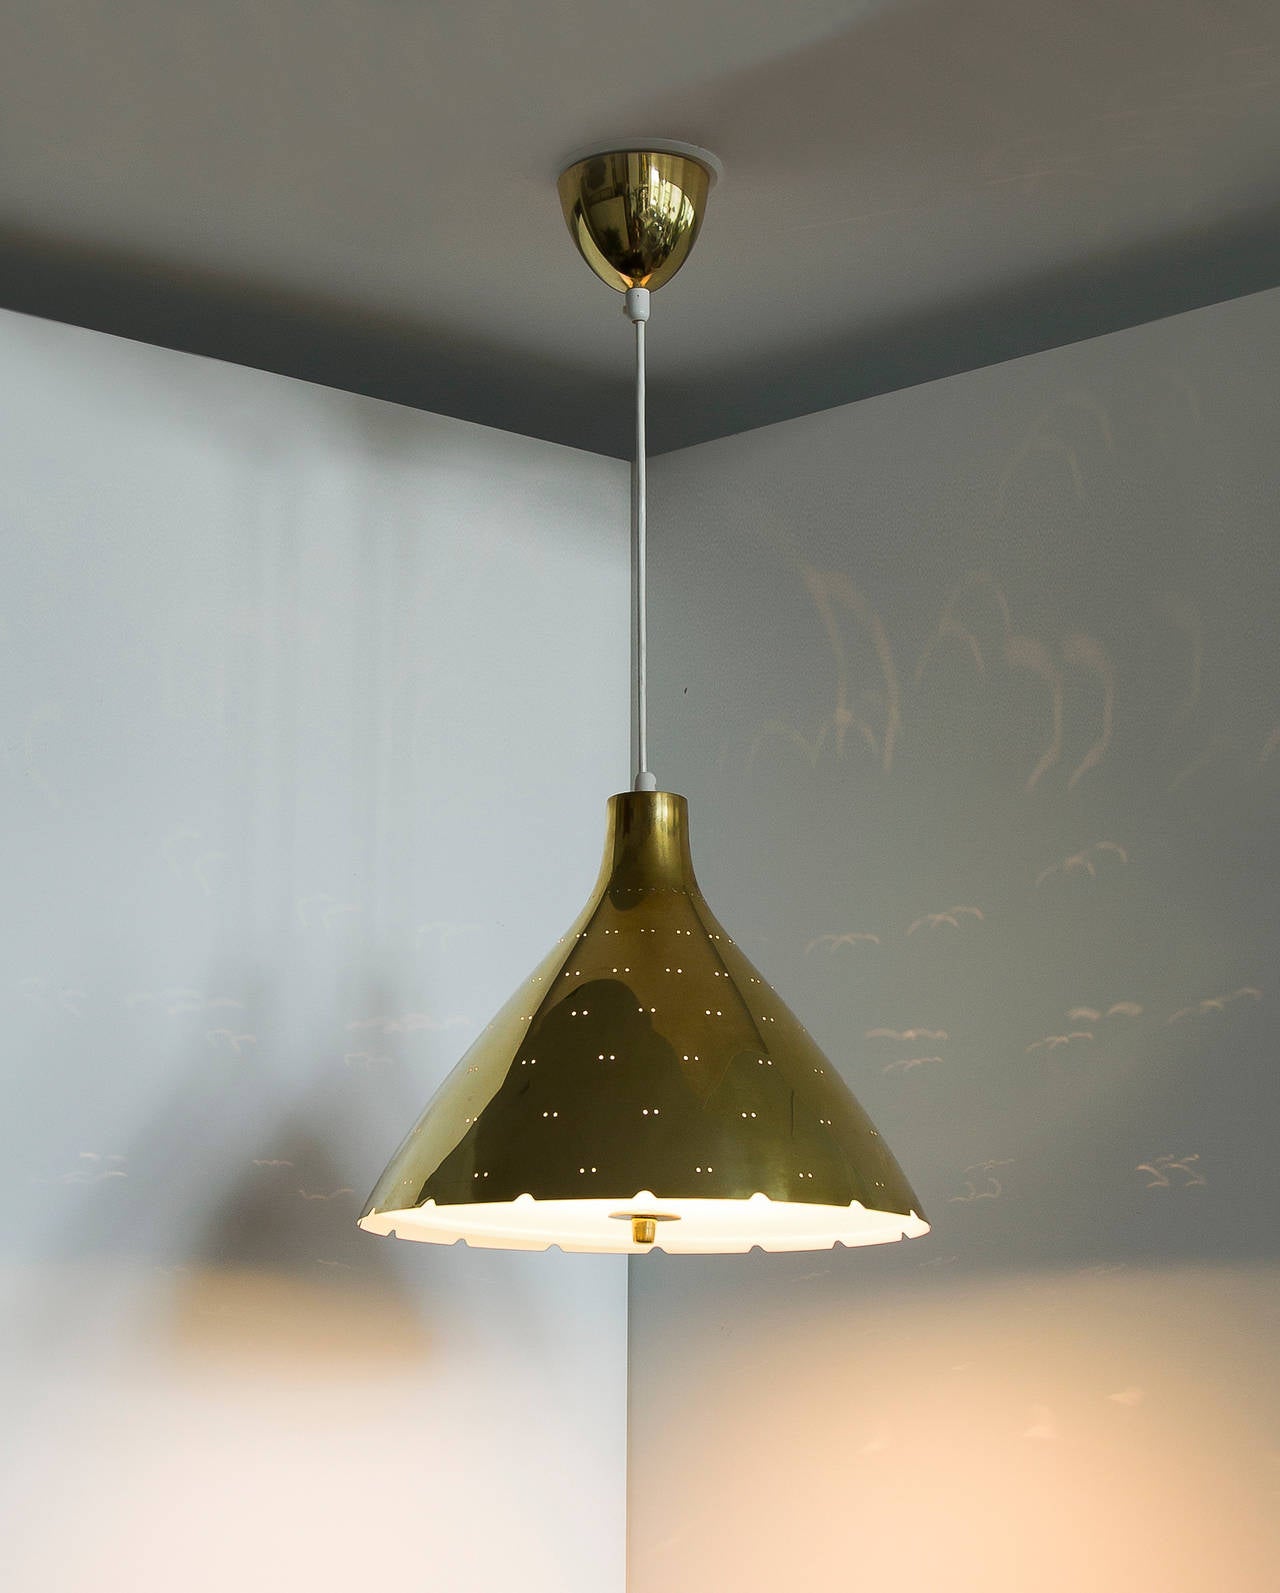 Scandinavian Modern Pair of Paavo Tynell Ceiling Lamps, Taito Oy